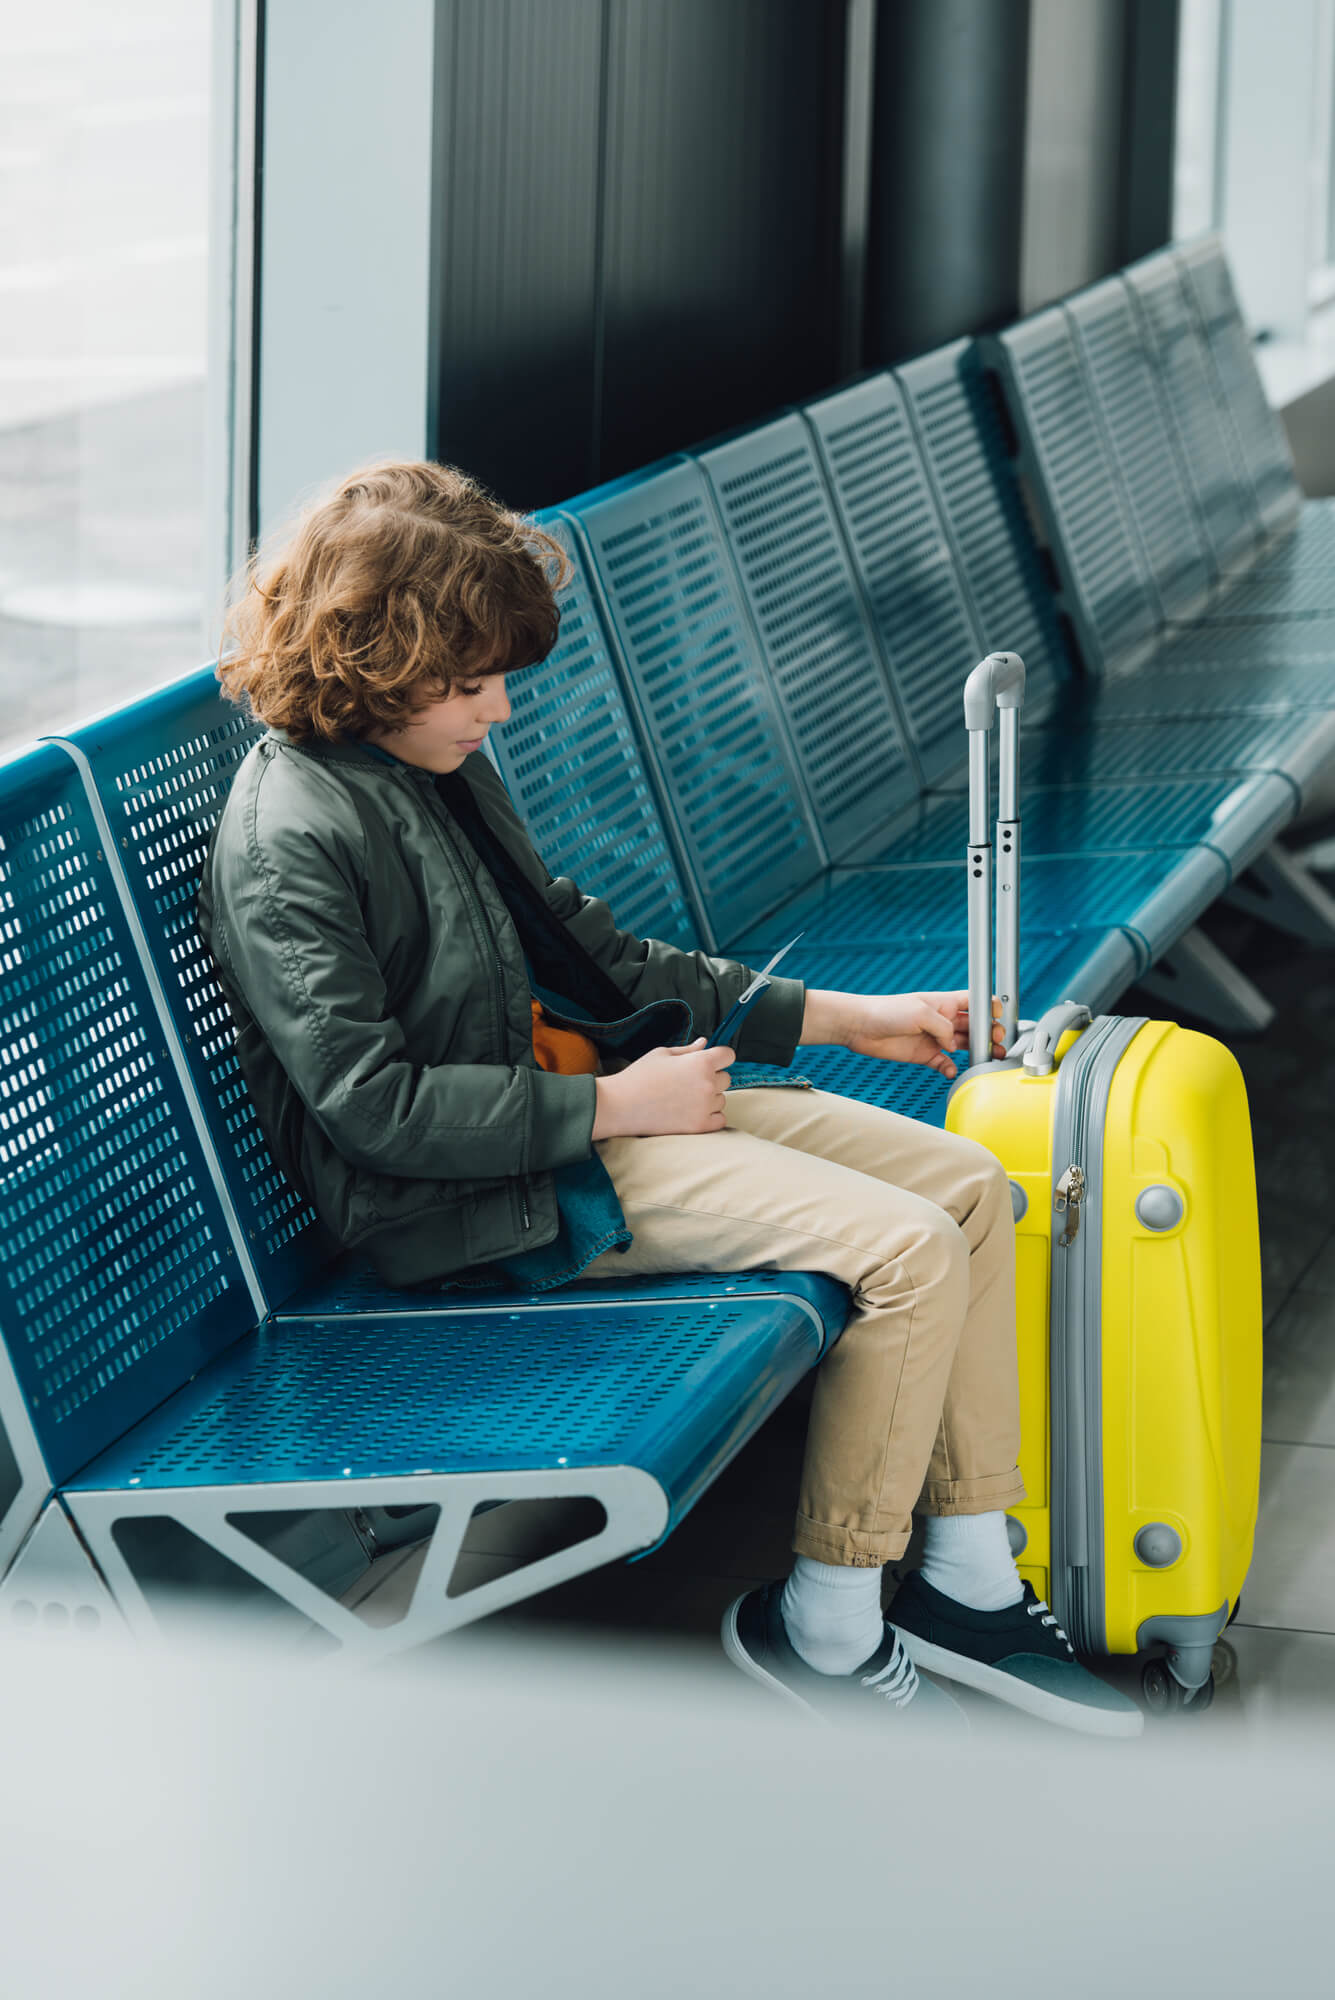 Best Scooter Luggage: Cruise Around the Airport in Style